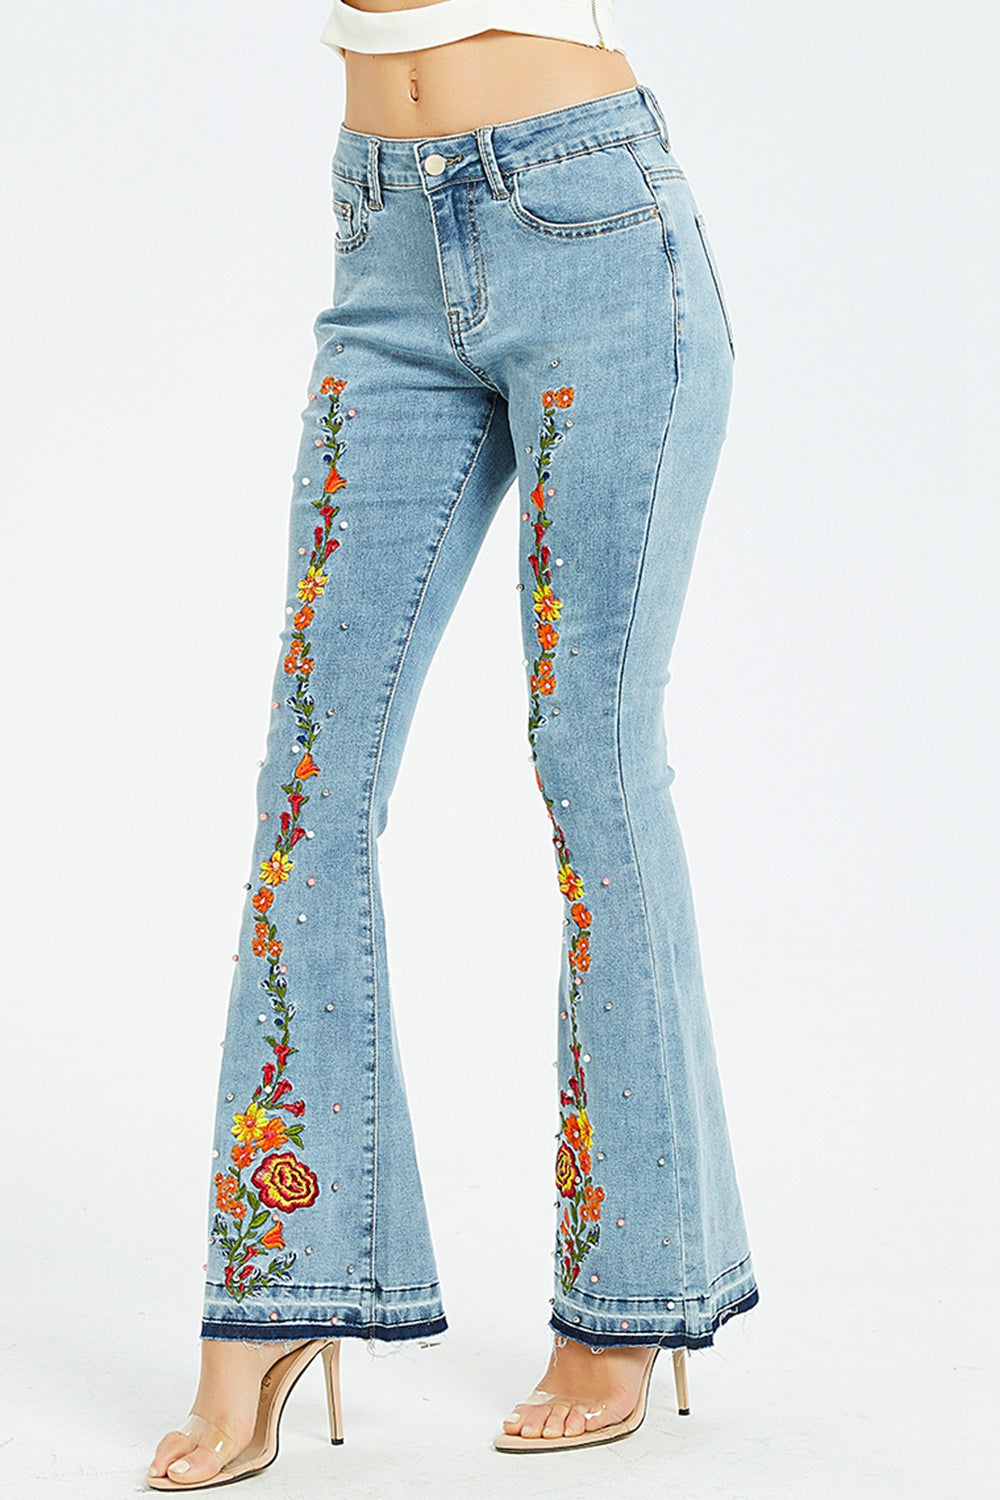 swvws Full Size Flower Embroidery Wide Leg Jeans